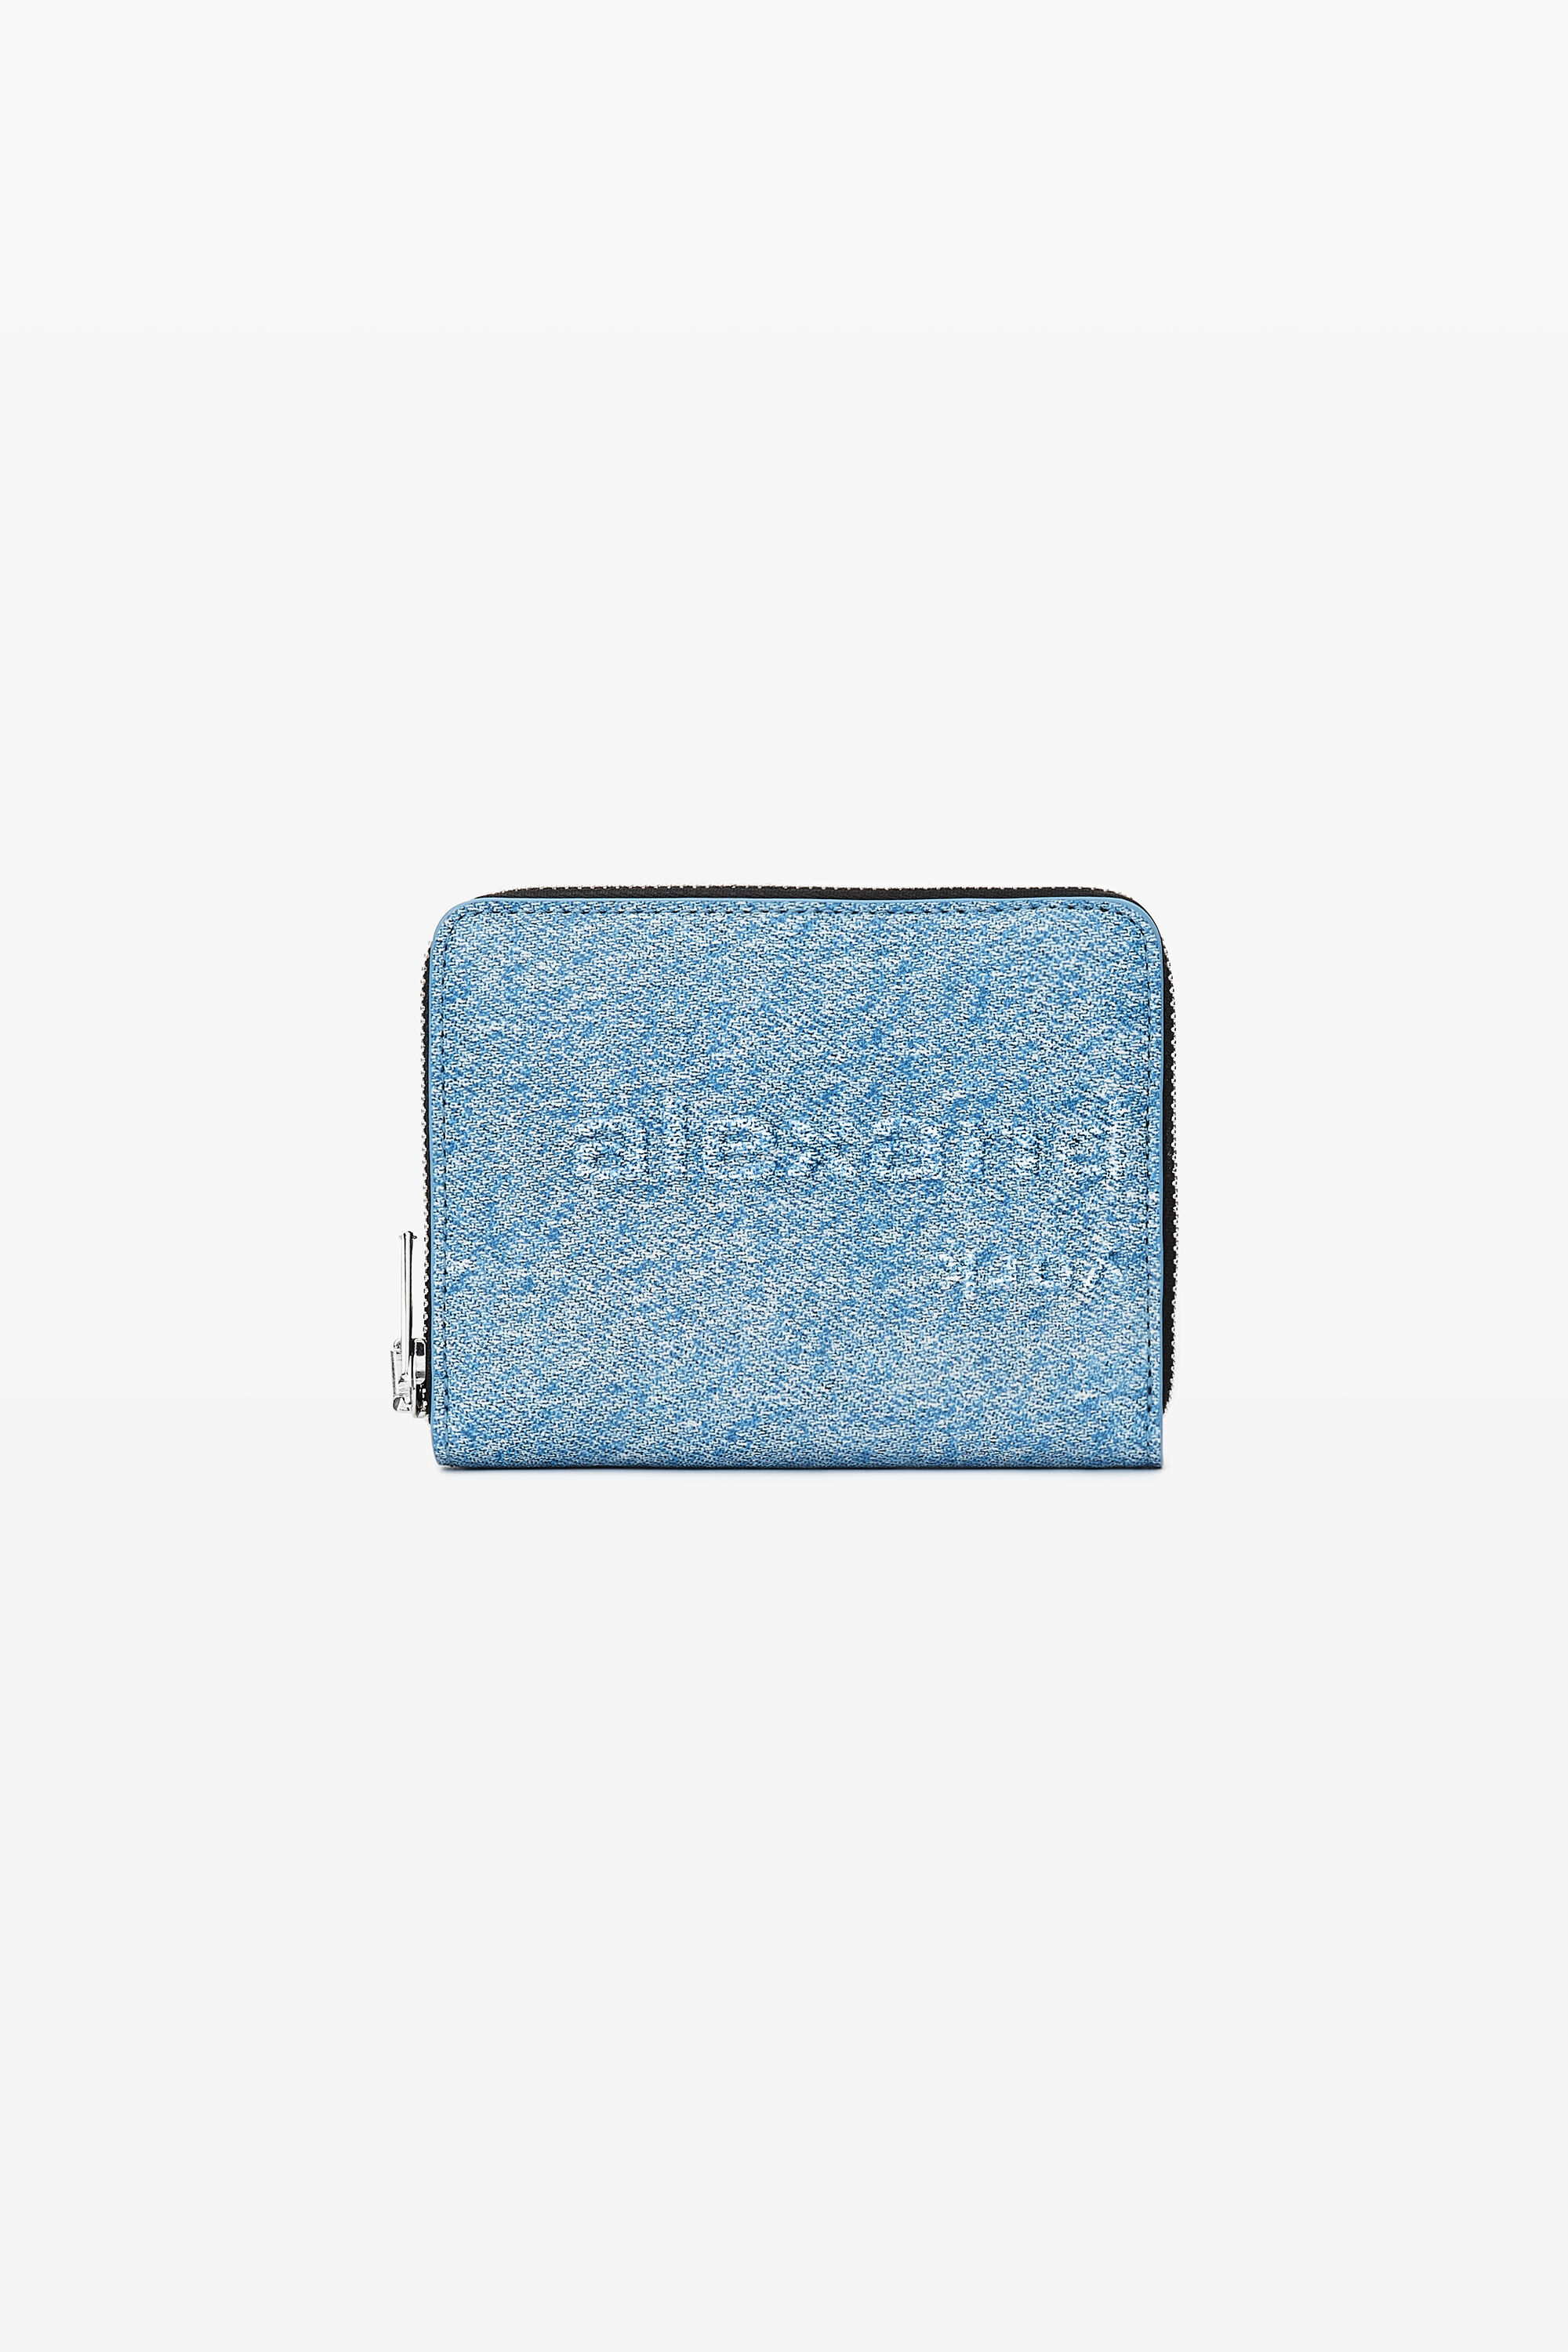 punch compact wallet in crackle patent leather in VINTAGE MEDIUM 